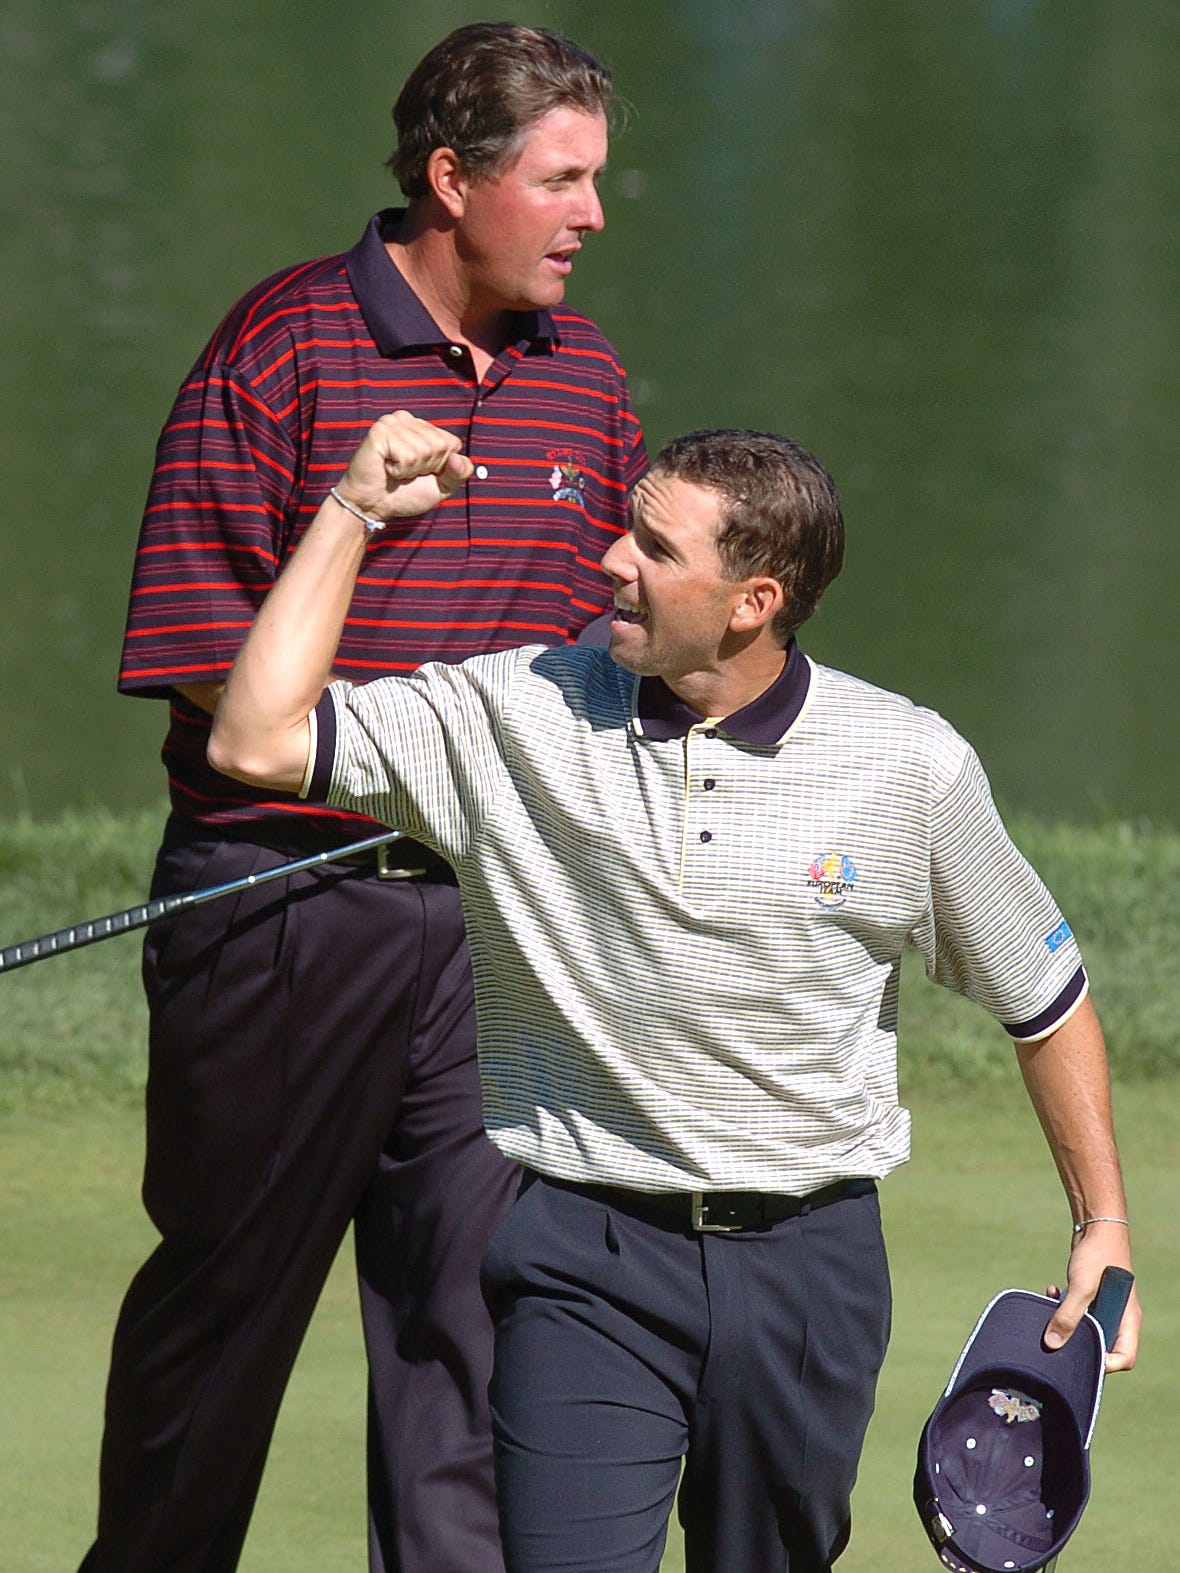 A tale of two golfers: Sergio Garcia celebrates in front of Phil Mickelson after taking his match at the 2004 Ryder Cup.